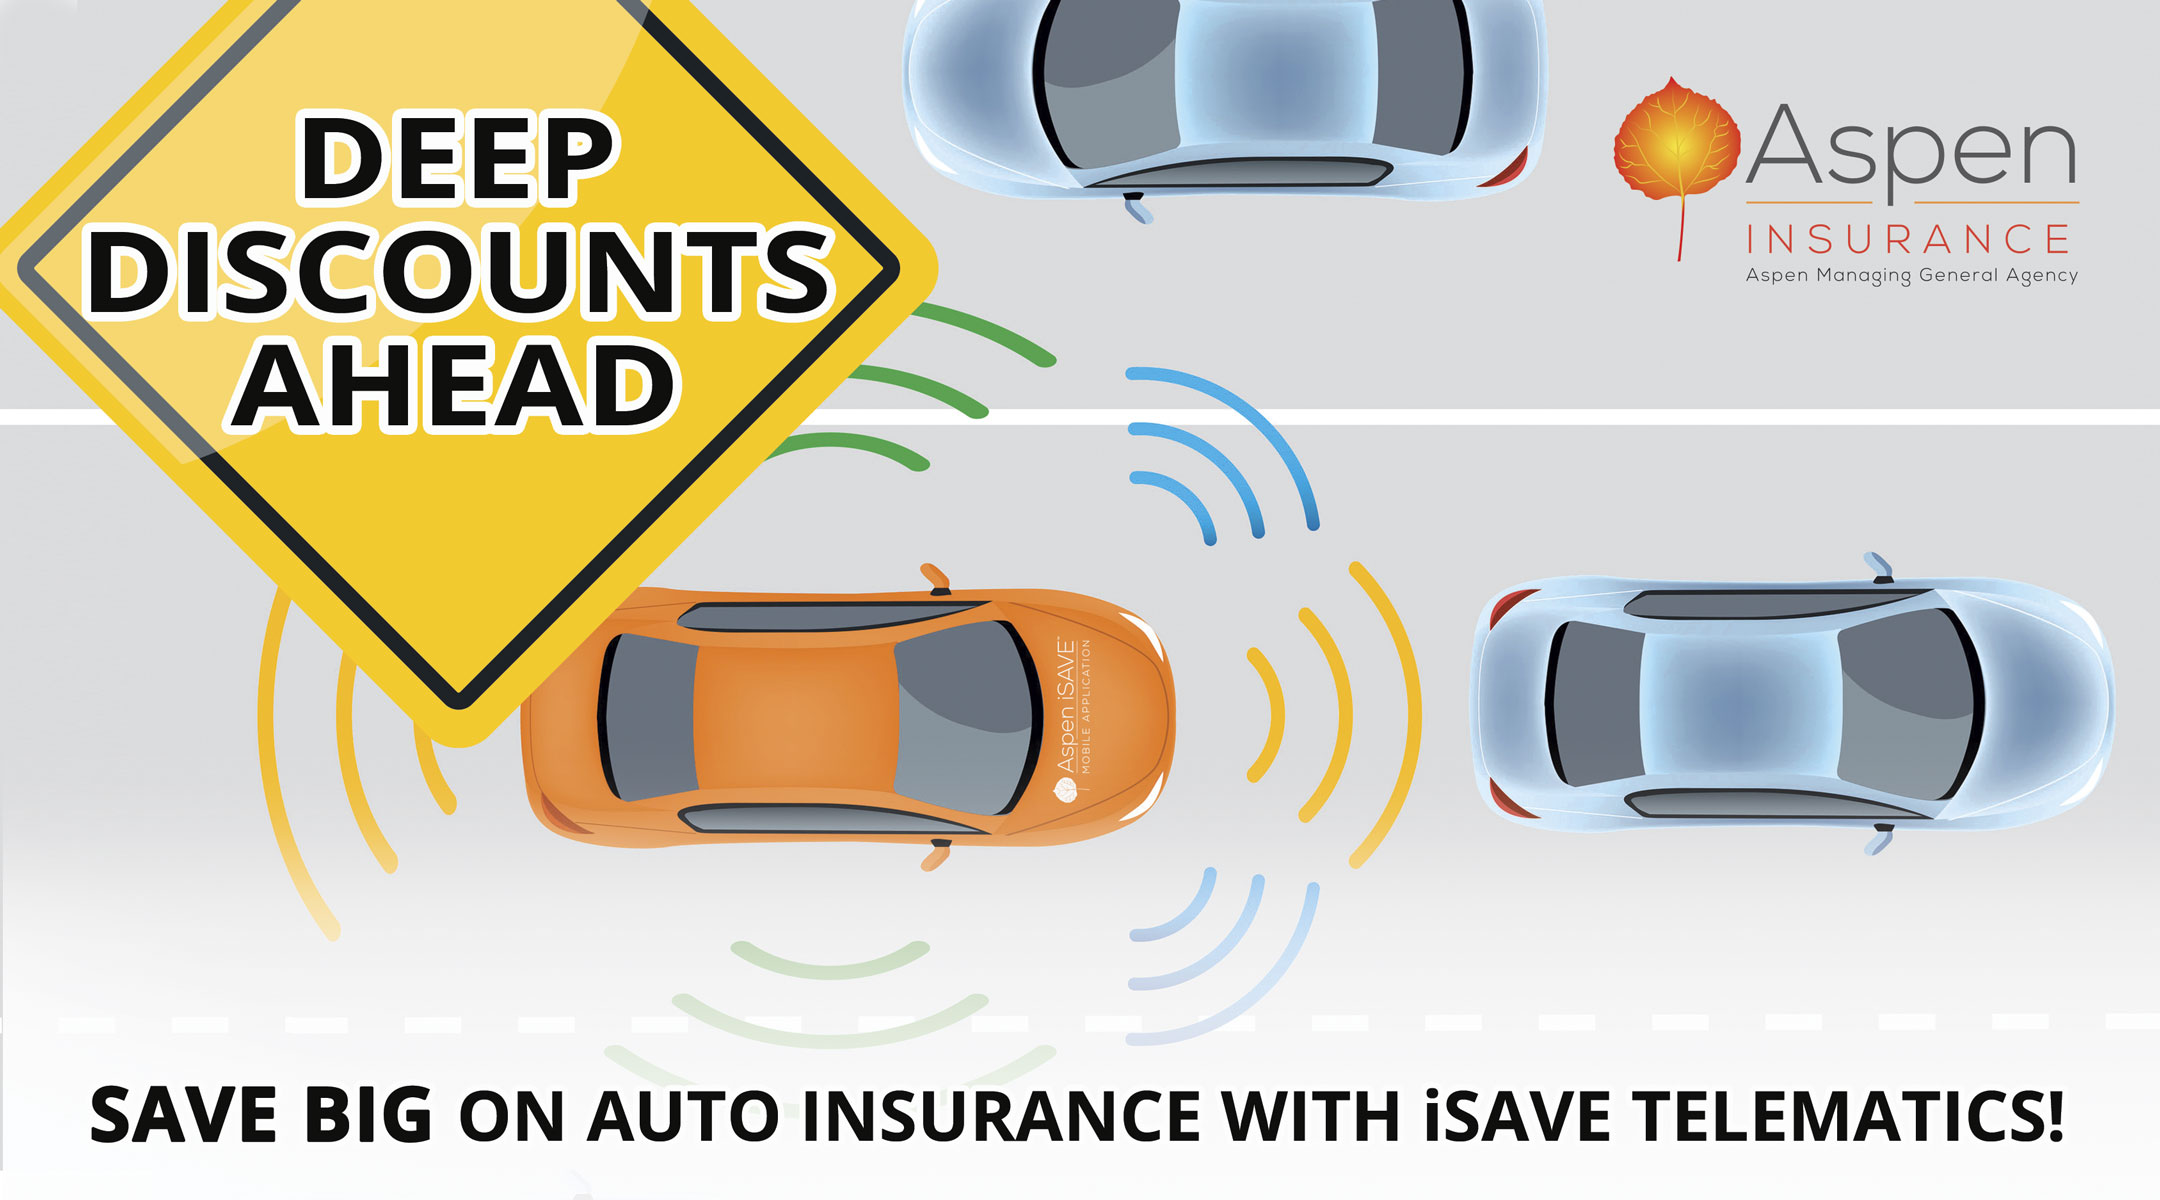 Save big on auto insurance with isave telematics!